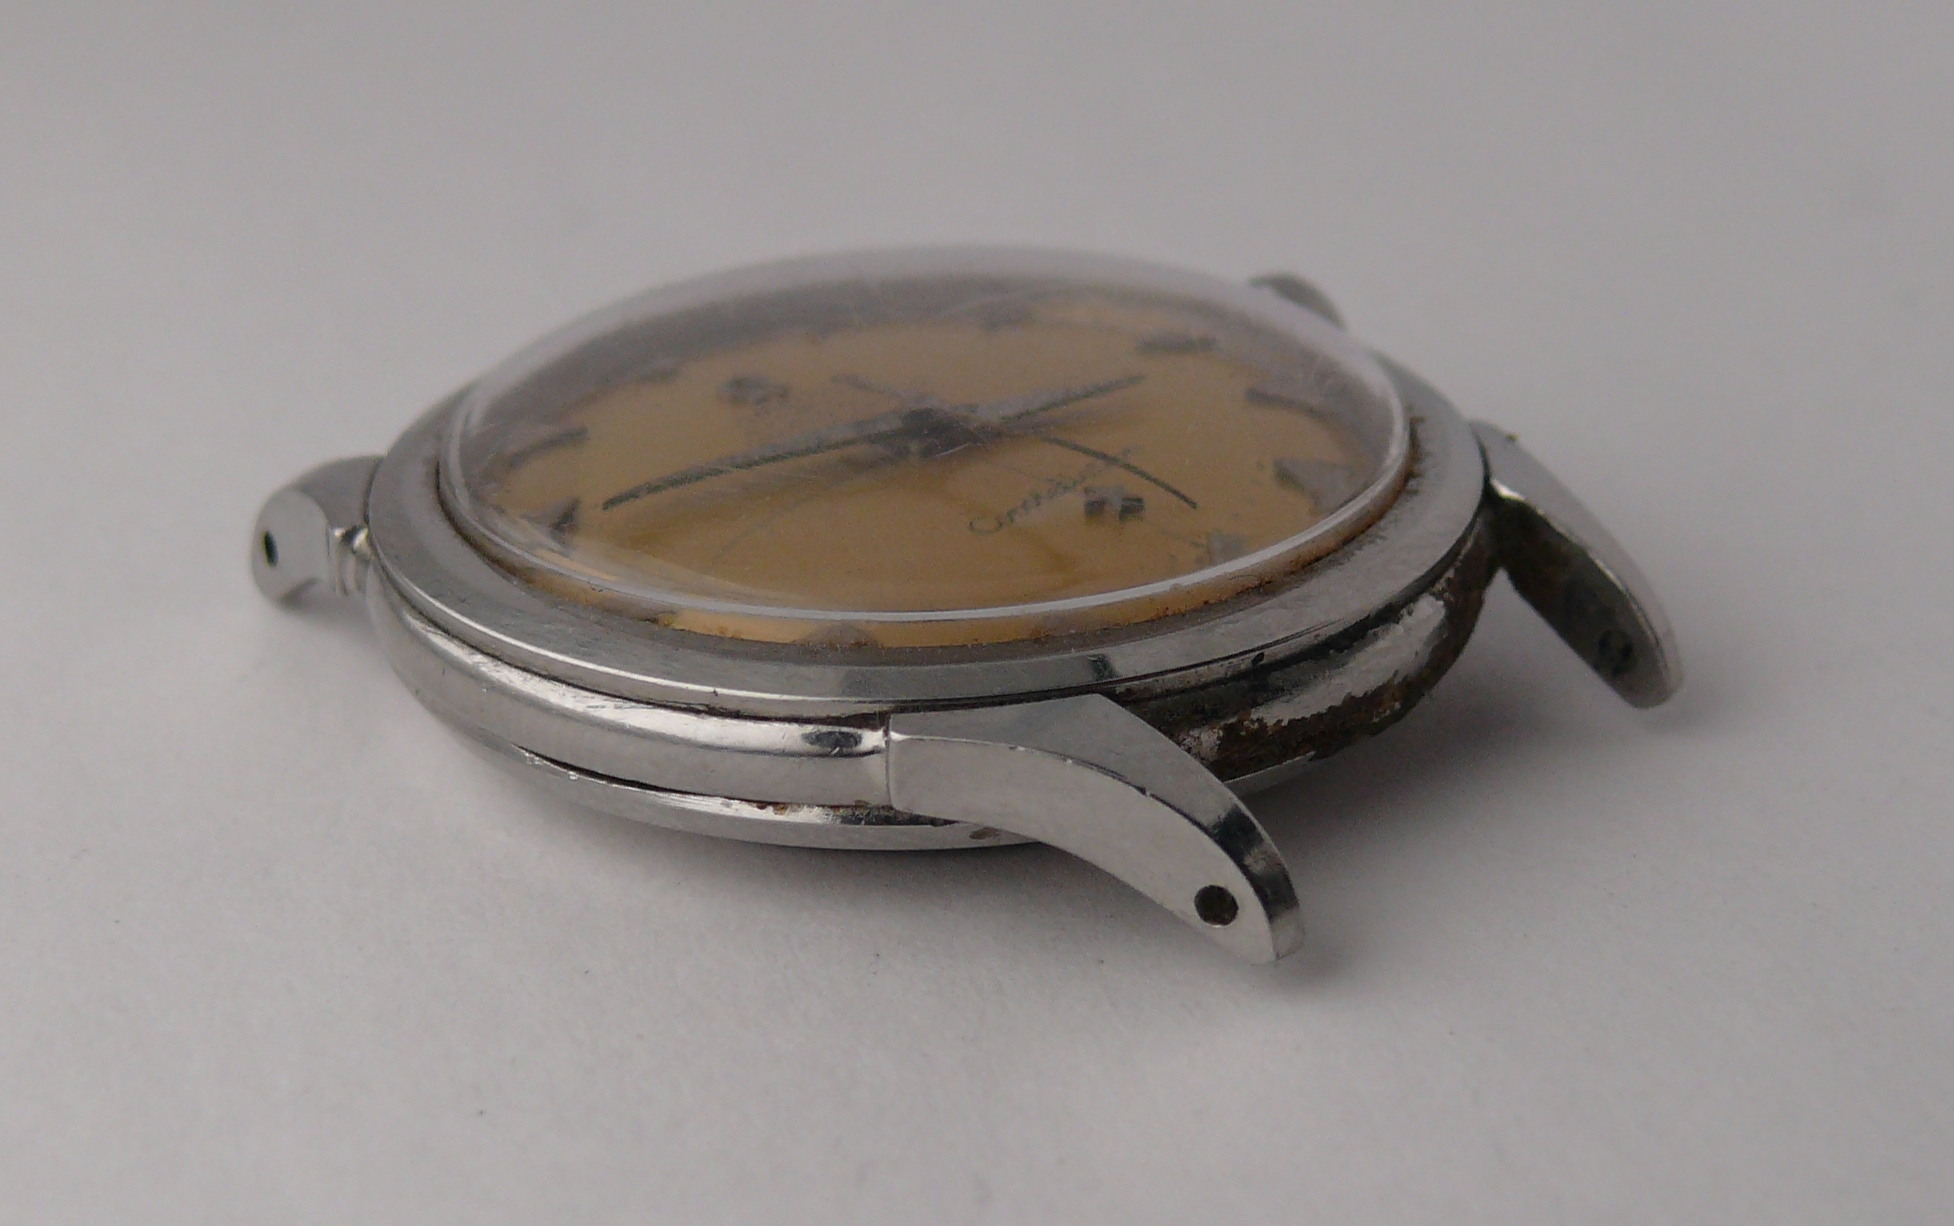 Vintage Omega Constellation Cronometre Certified Wristwatch Ref 2782. Original dial showing even “ - Image 4 of 12